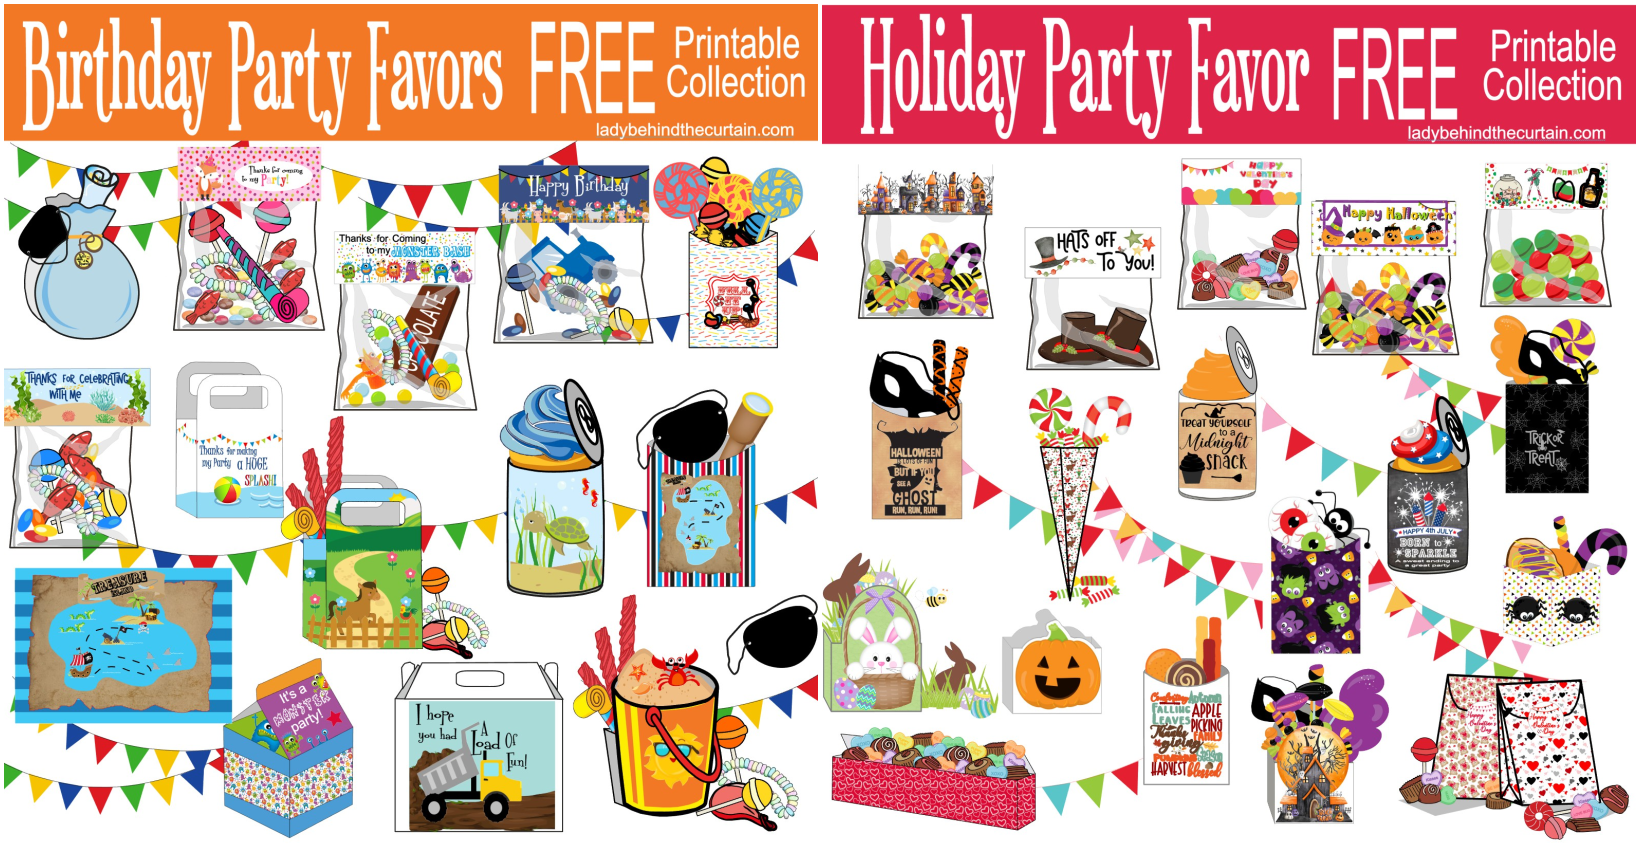 Party Favor FREE Printable Collections